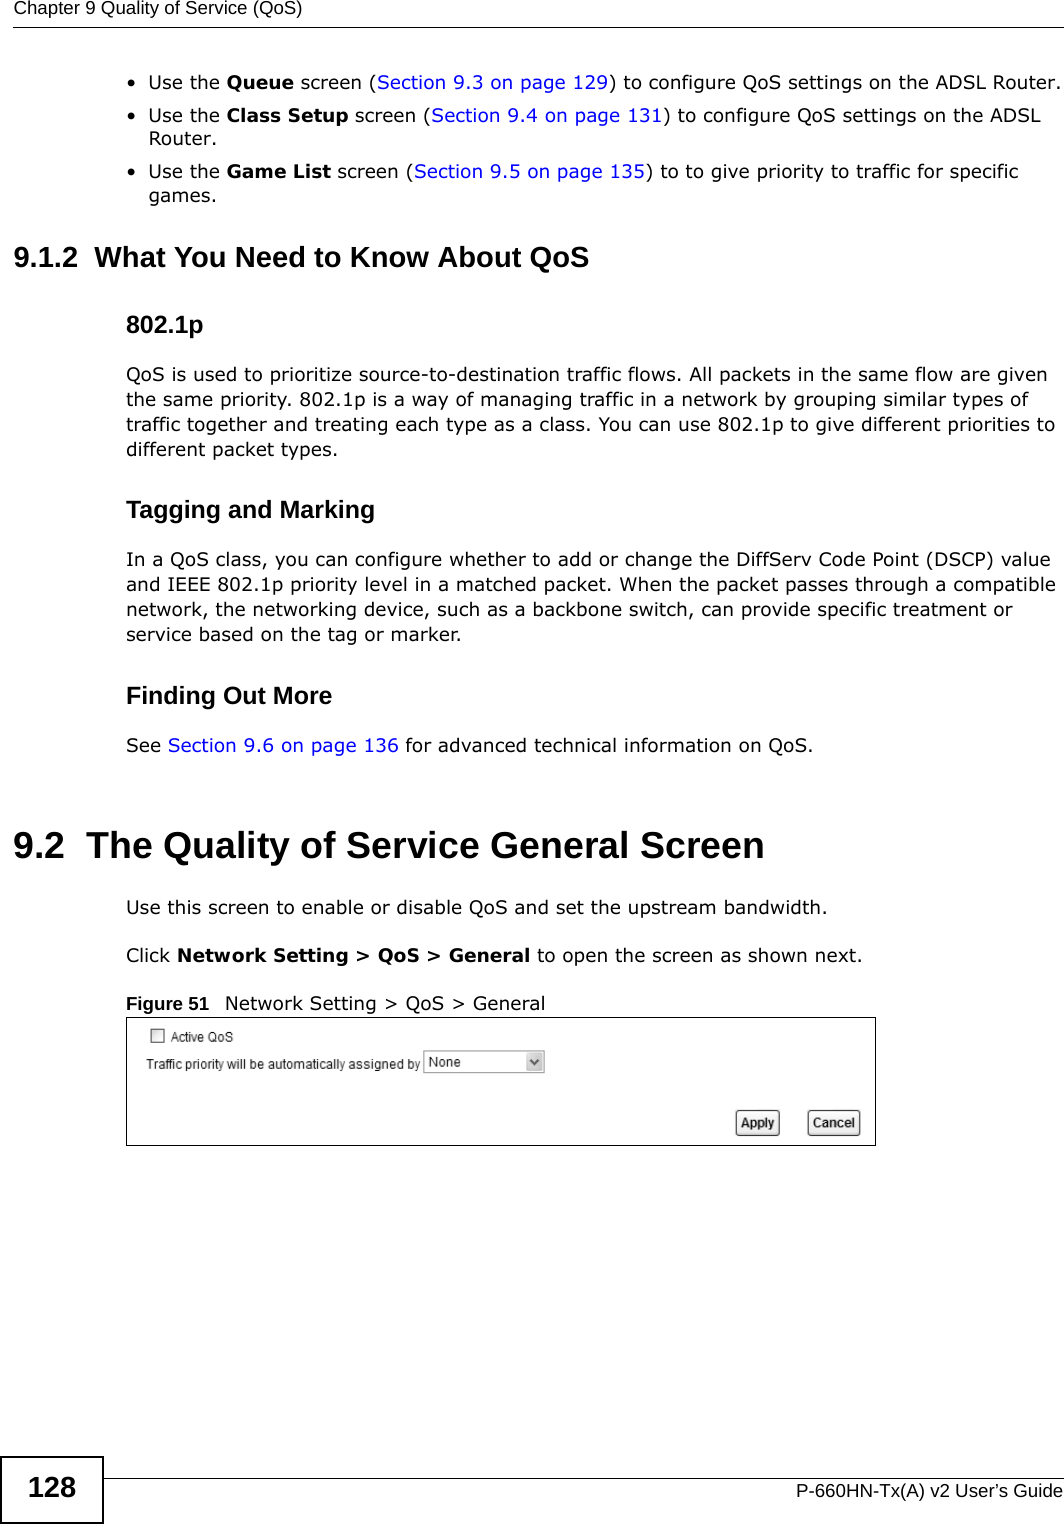 Chapter 9 Quality of Service (QoS)P-660HN-Tx(A) v2 User’s Guide128•Use the Queue screen (Section 9.3 on page 129) to configure QoS settings on the ADSL Router.•Use the Class Setup screen (Section 9.4 on page 131) to configure QoS settings on the ADSL Router.•Use the Game List screen (Section 9.5 on page 135) to to give priority to traffic for specific games.9.1.2  What You Need to Know About QoS802.1pQoS is used to prioritize source-to-destination traffic flows. All packets in the same flow are given the same priority. 802.1p is a way of managing traffic in a network by grouping similar types of traffic together and treating each type as a class. You can use 802.1p to give different priorities to different packet types. Tagging and MarkingIn a QoS class, you can configure whether to add or change the DiffServ Code Point (DSCP) value and IEEE 802.1p priority level in a matched packet. When the packet passes through a compatible network, the networking device, such as a backbone switch, can provide specific treatment or service based on the tag or marker.Finding Out MoreSee Section 9.6 on page 136 for advanced technical information on QoS.9.2  The Quality of Service General ScreenUse this screen to enable or disable QoS and set the upstream bandwidth.Click Network Setting &gt; QoS &gt; General to open the screen as shown next.Figure 51   Network Setting &gt; QoS &gt; General